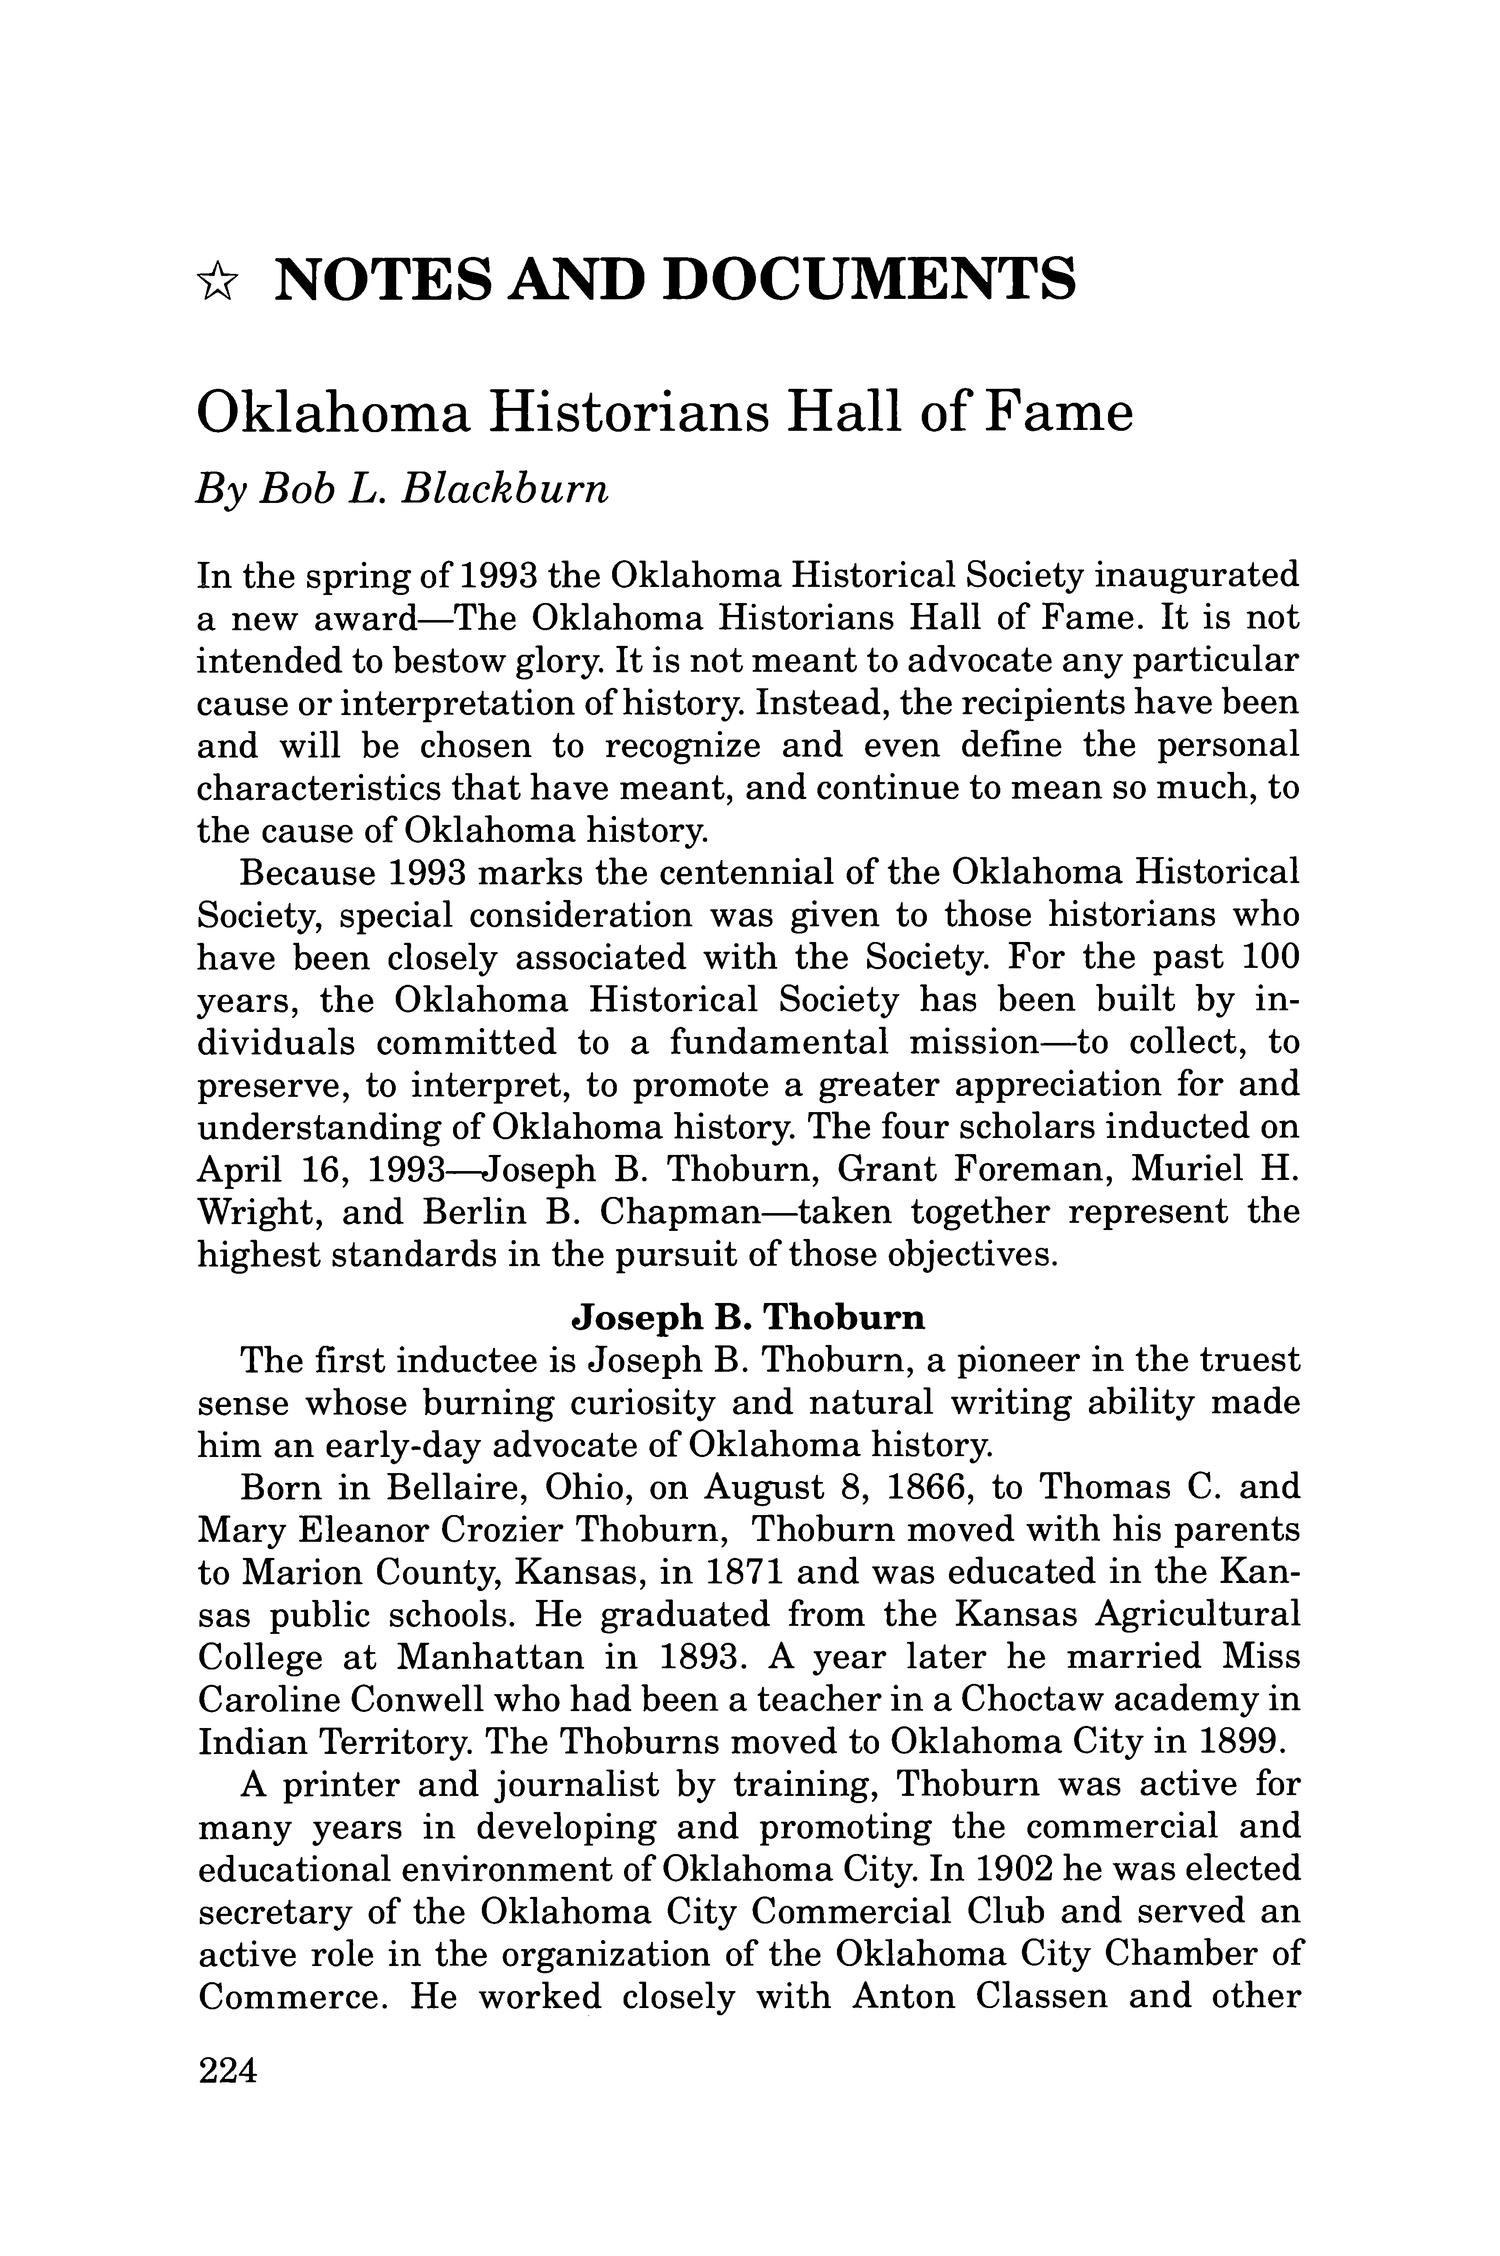 Chronicles of Oklahoma, Volume 71, Number 2, Summer 1993
                                                
                                                    224
                                                